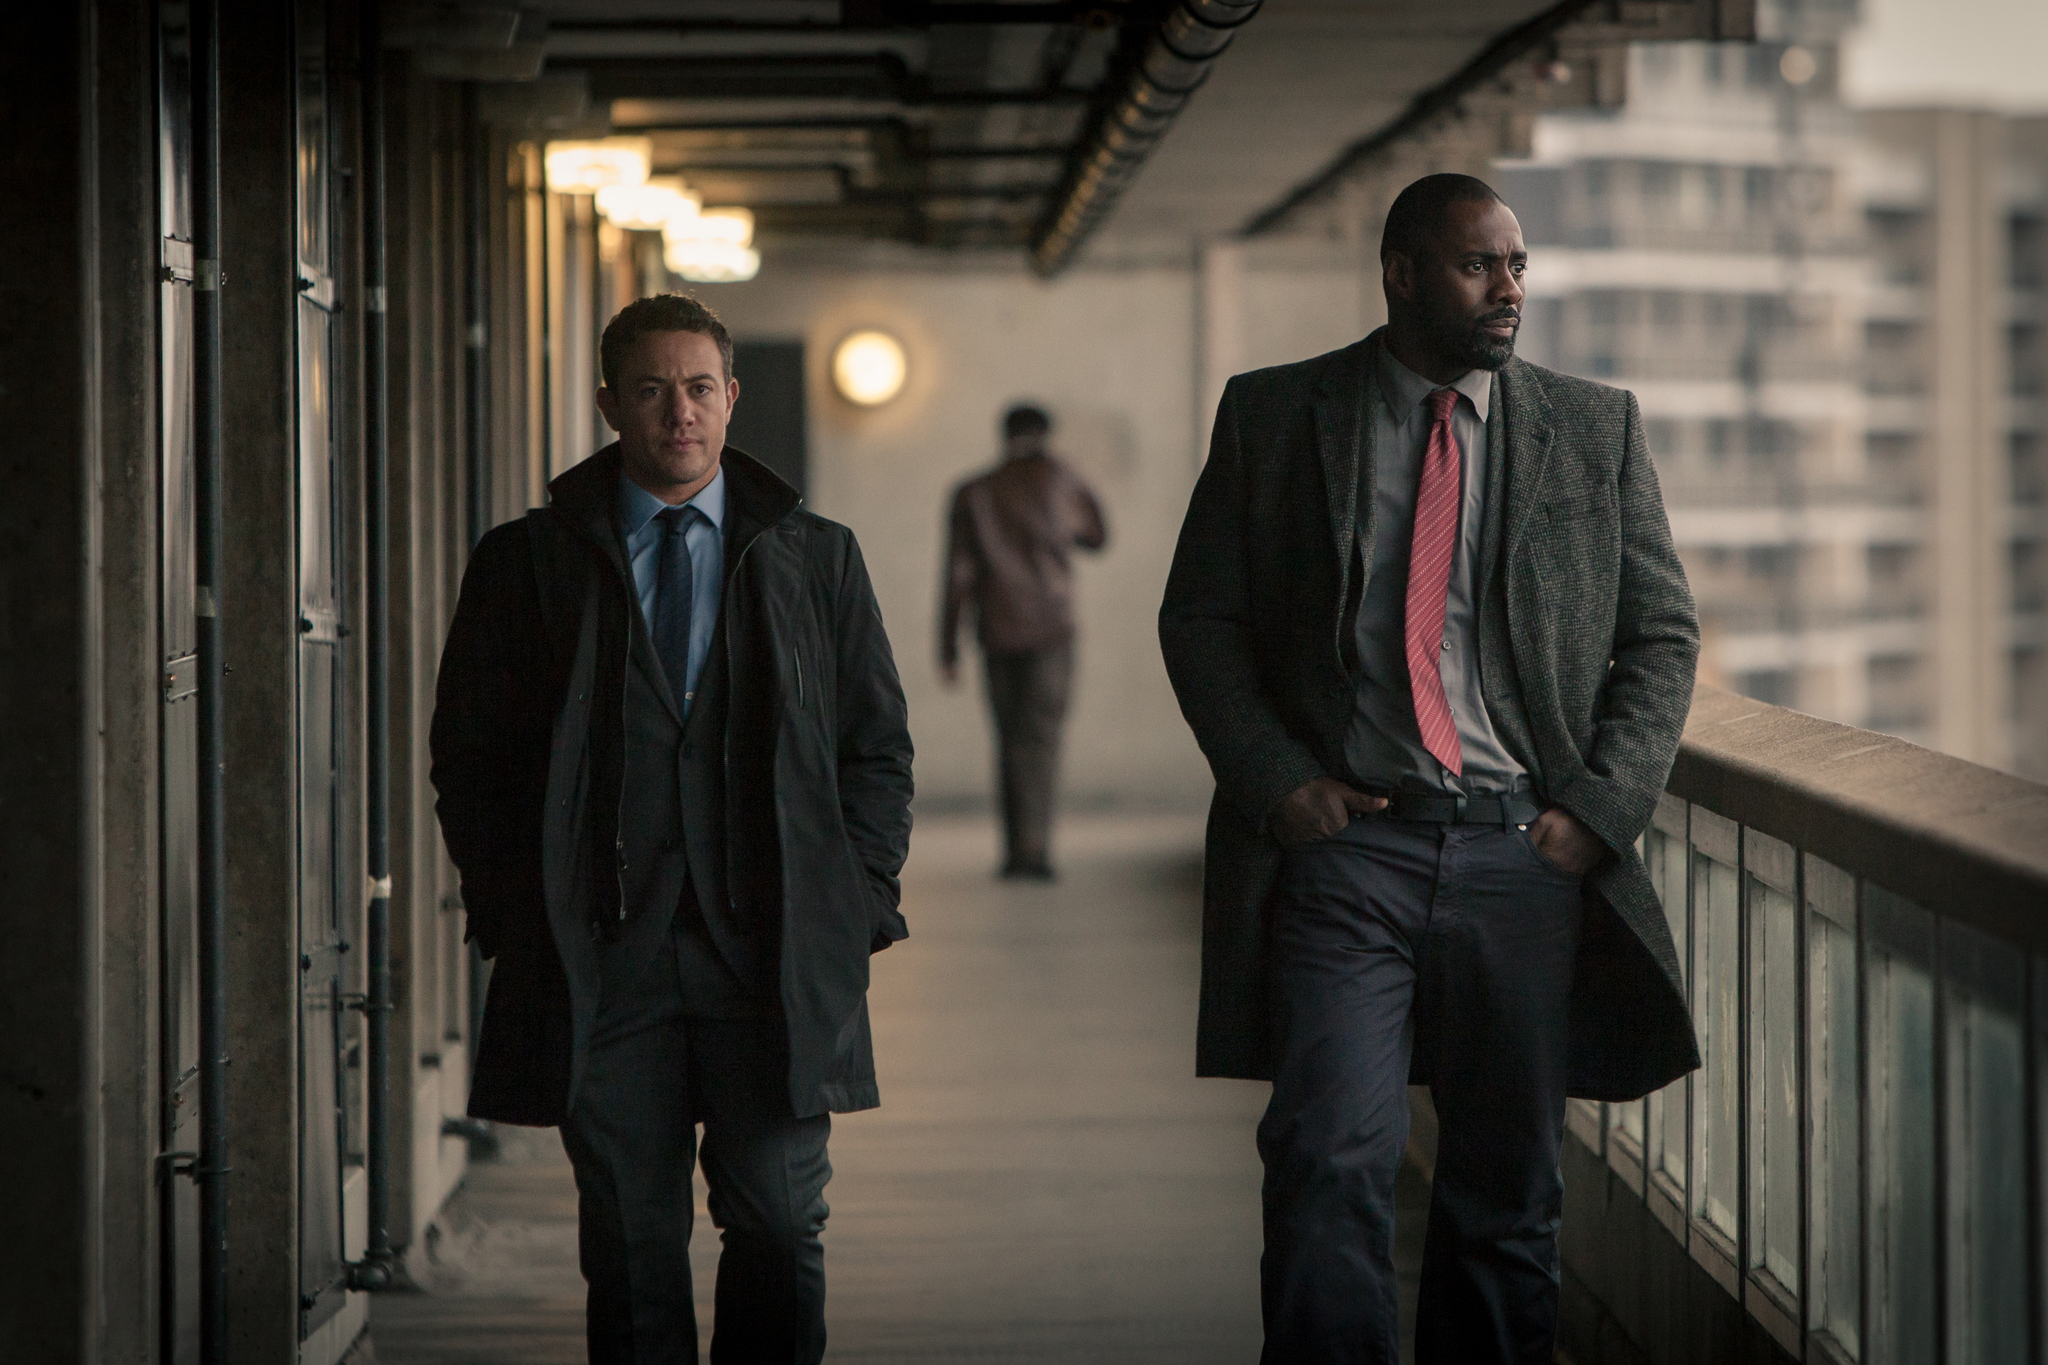 Still of Idris Elba and Warren Brown in Luther (2010)